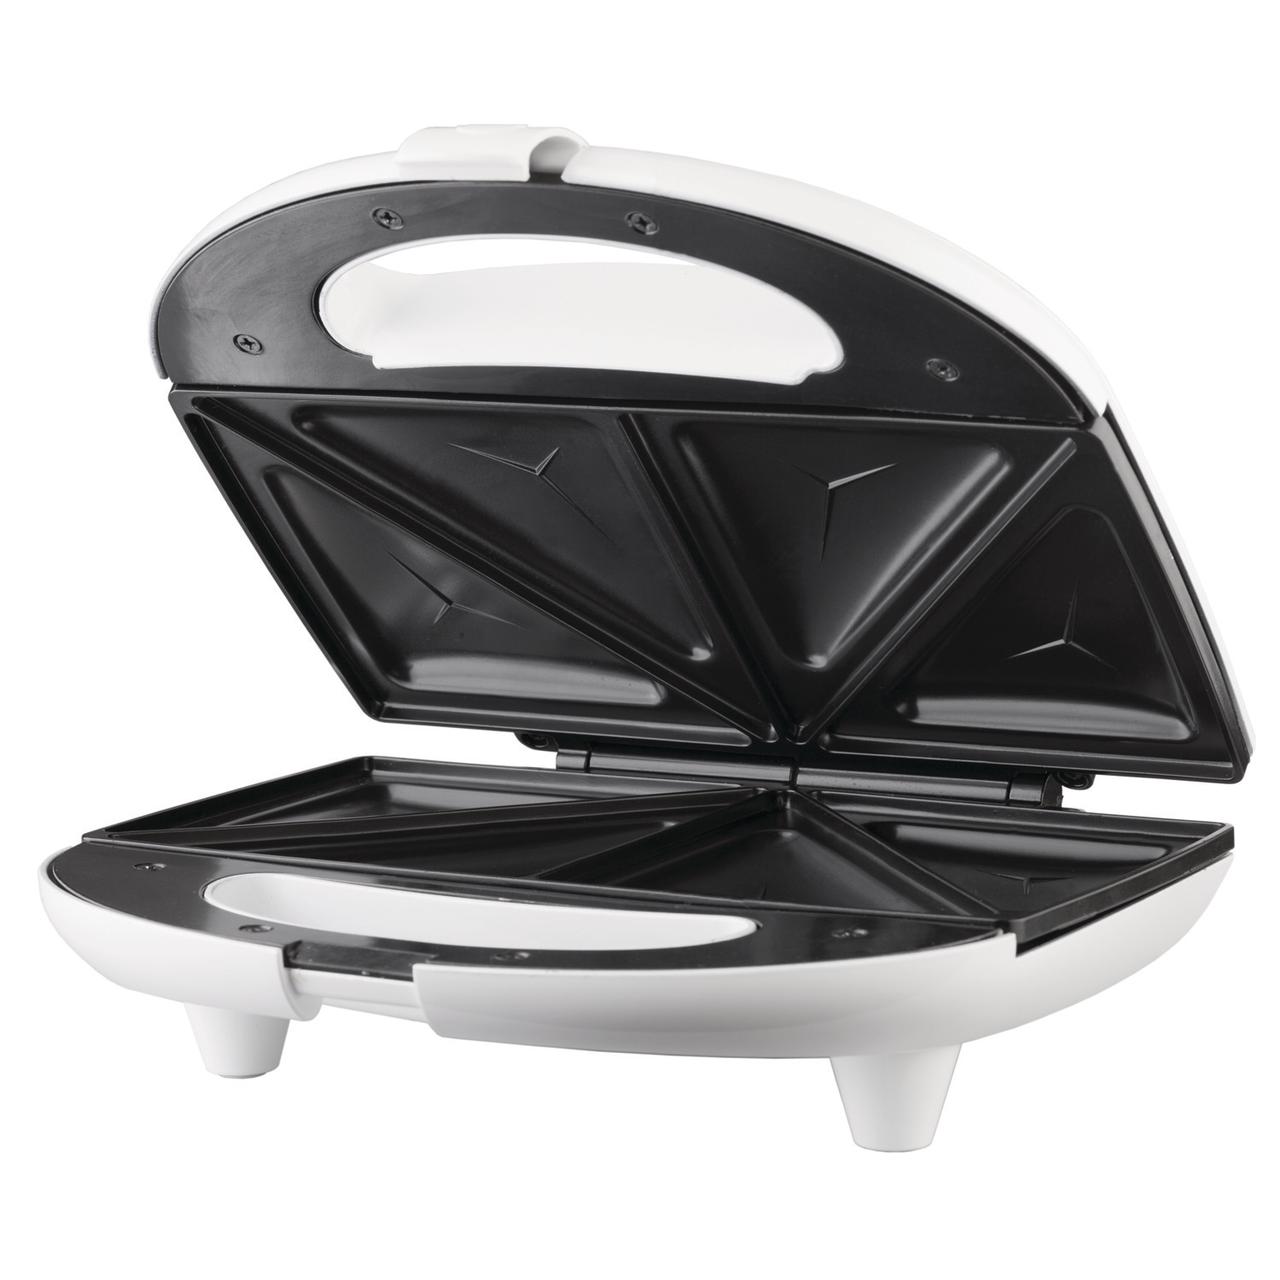 Brentwood Appliances TS-240W Nonstick Compact Dual Sandwich Maker (White) - image 2 of 3